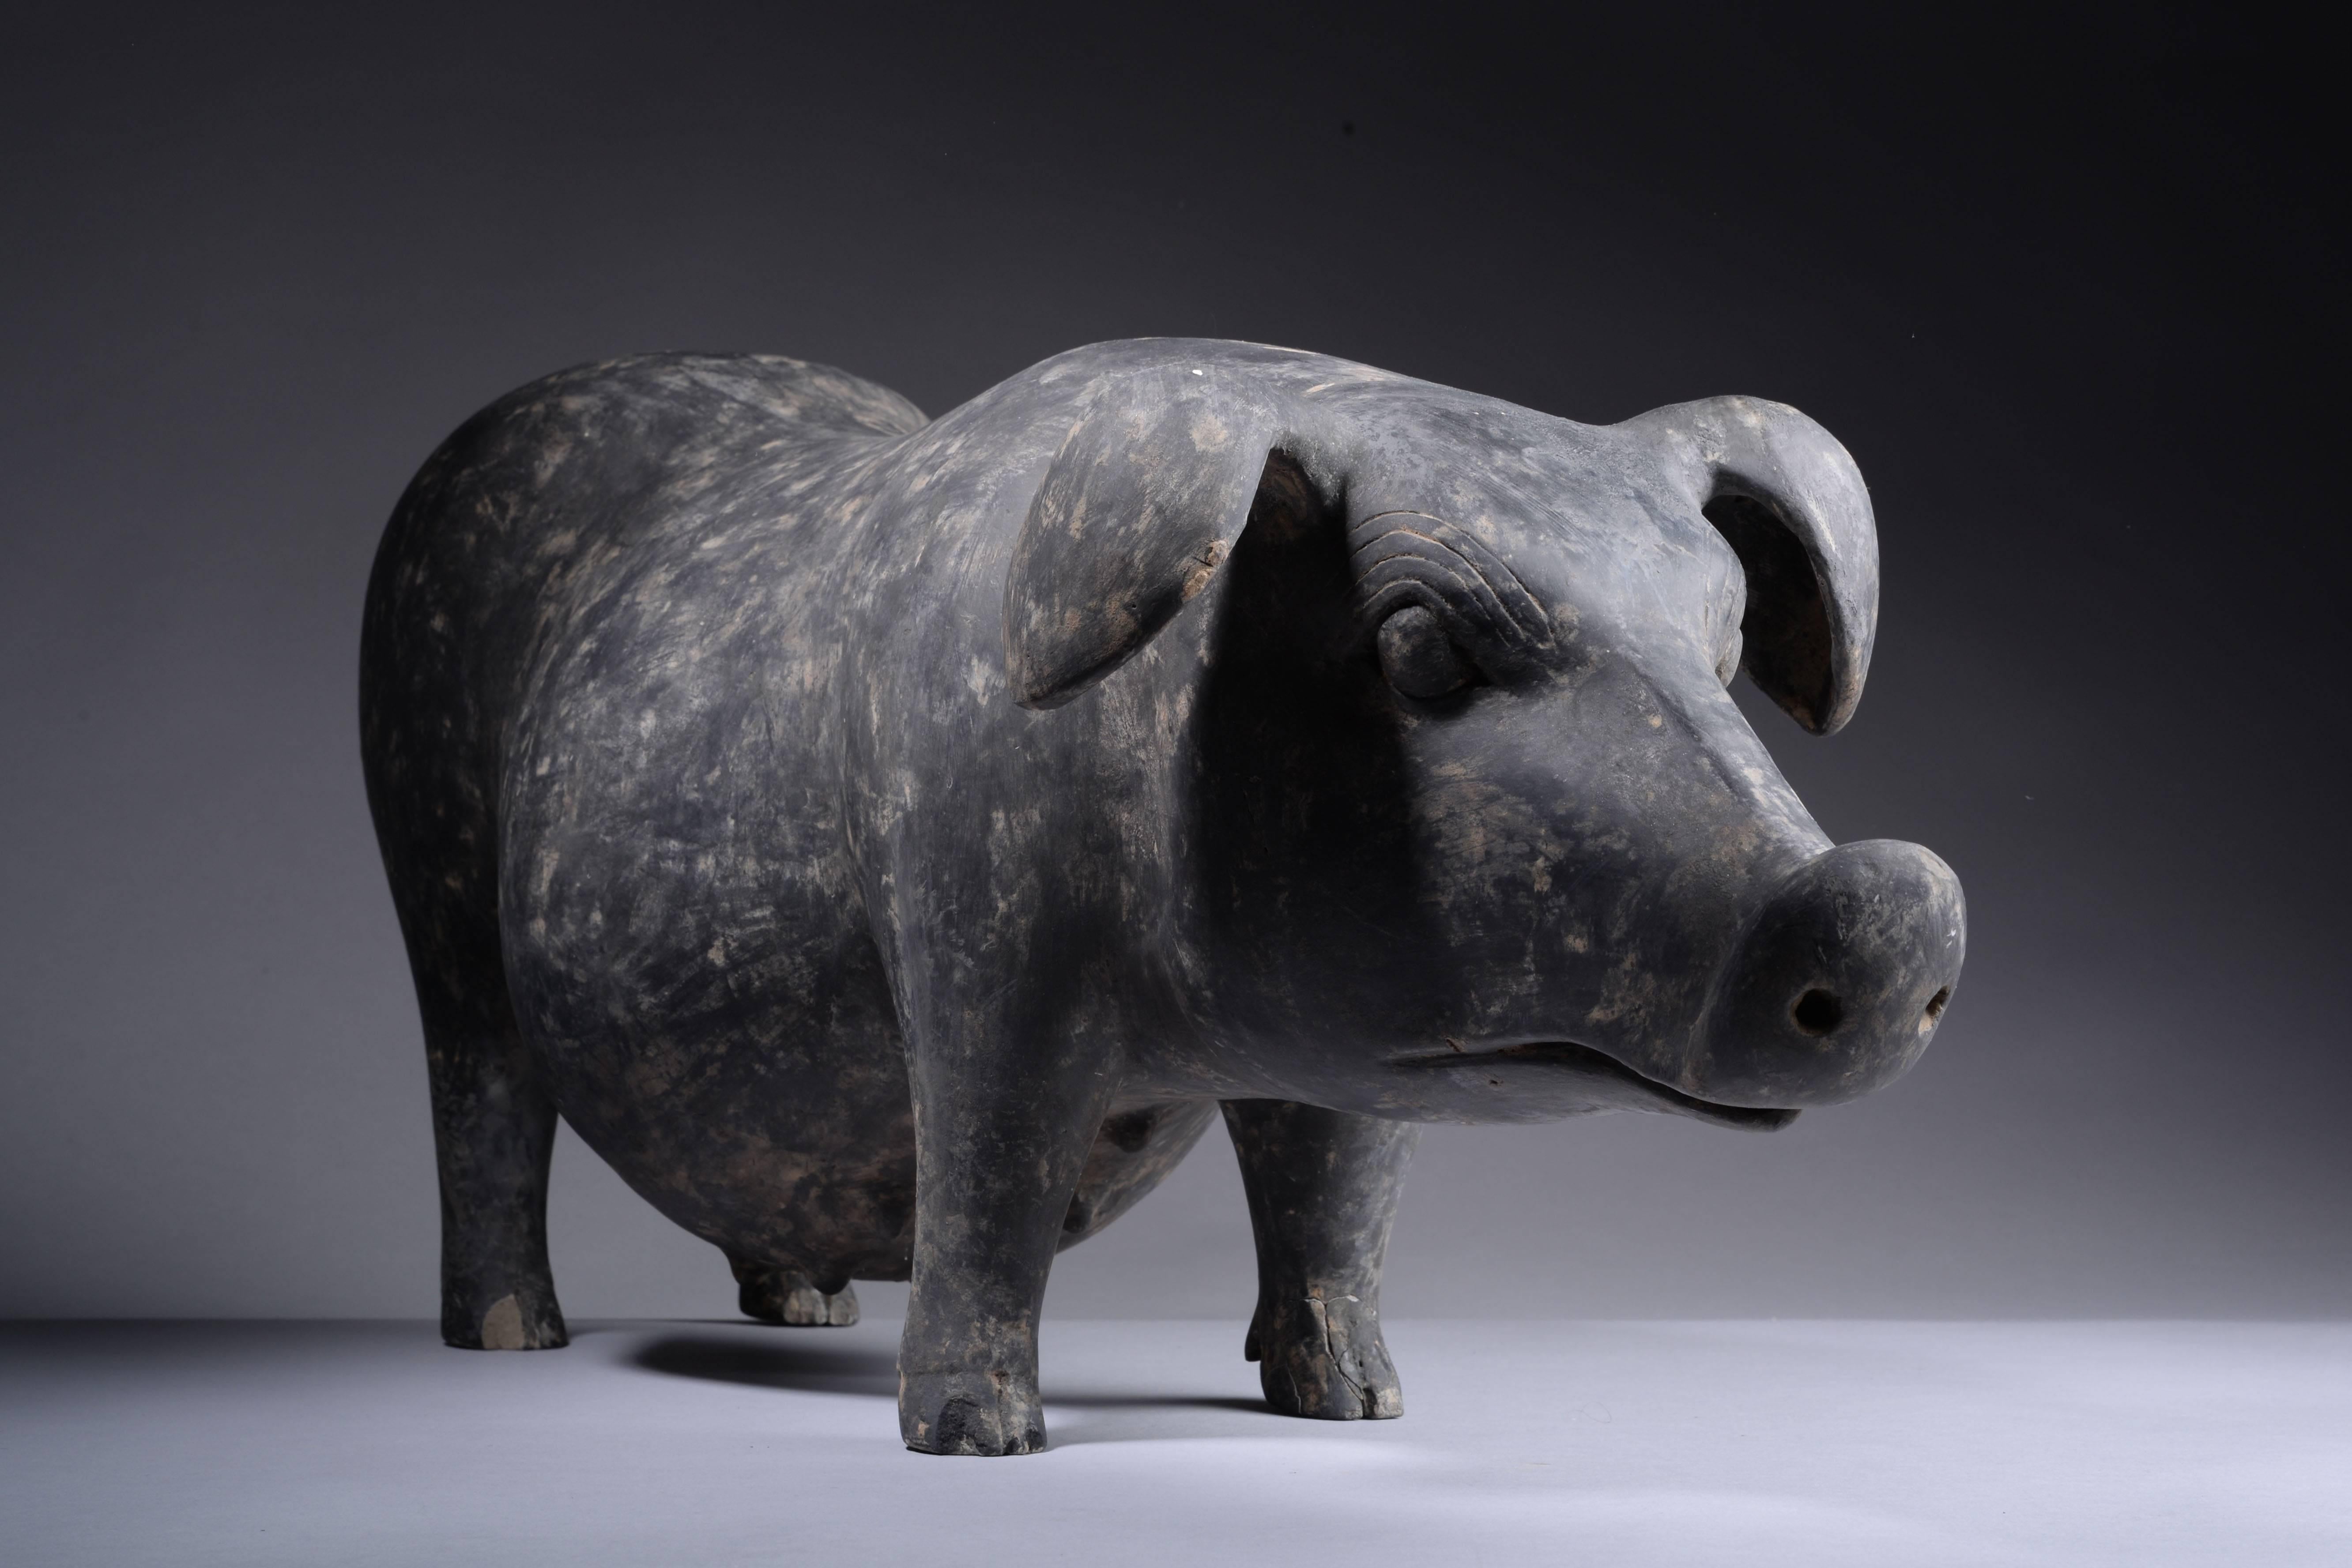 A very large ancient Chinese Han dynasty terracotta figure of a boar or pig, dating to approximately 206 BC-220 AD.

The animal is shown standing foursquare, the tail curled on the body, the ears folded out in a cup-shape. The ancient artist,